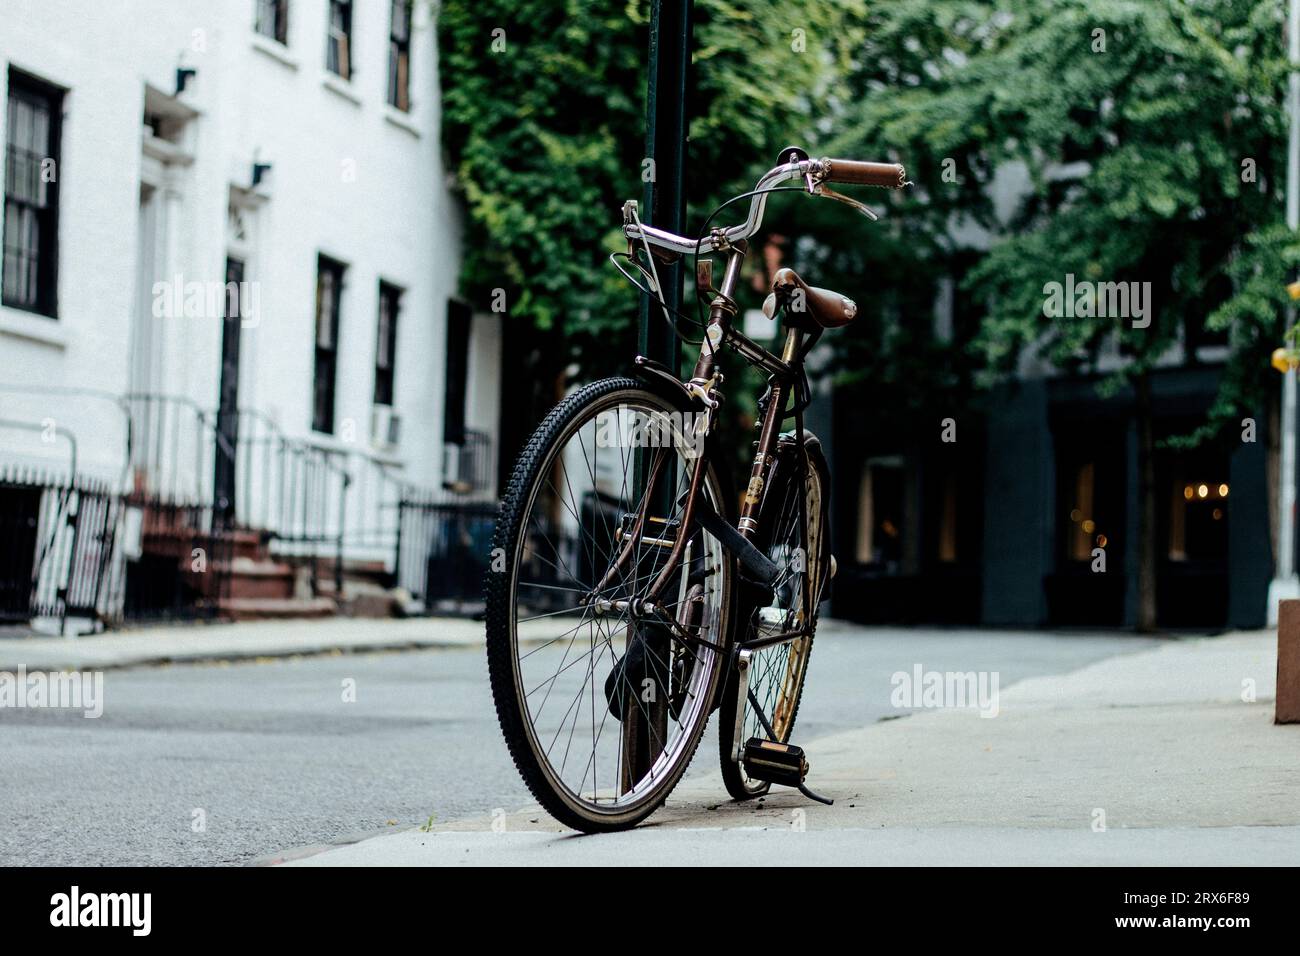 USA, New York State, New York City, Old-fashioned bicycle standing on street Stock Photo